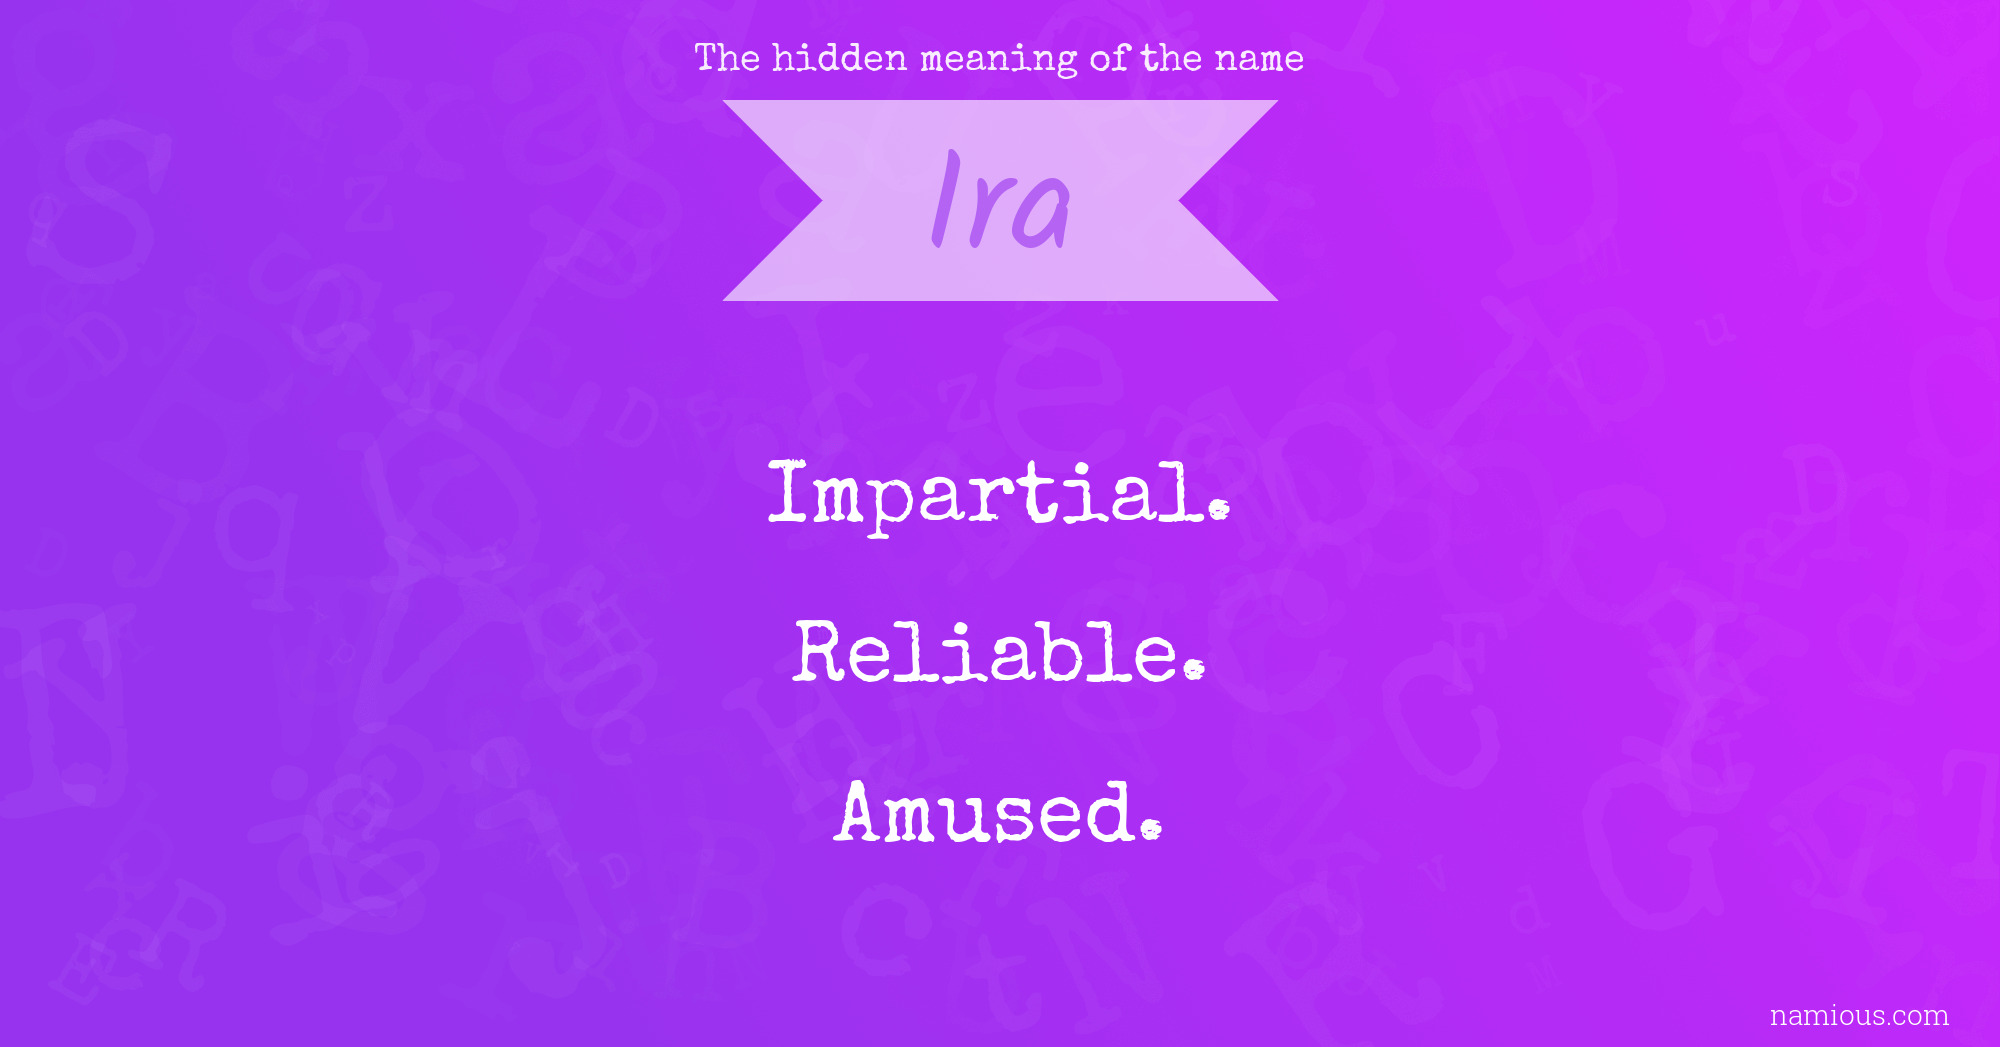 The hidden meaning of the name Ira